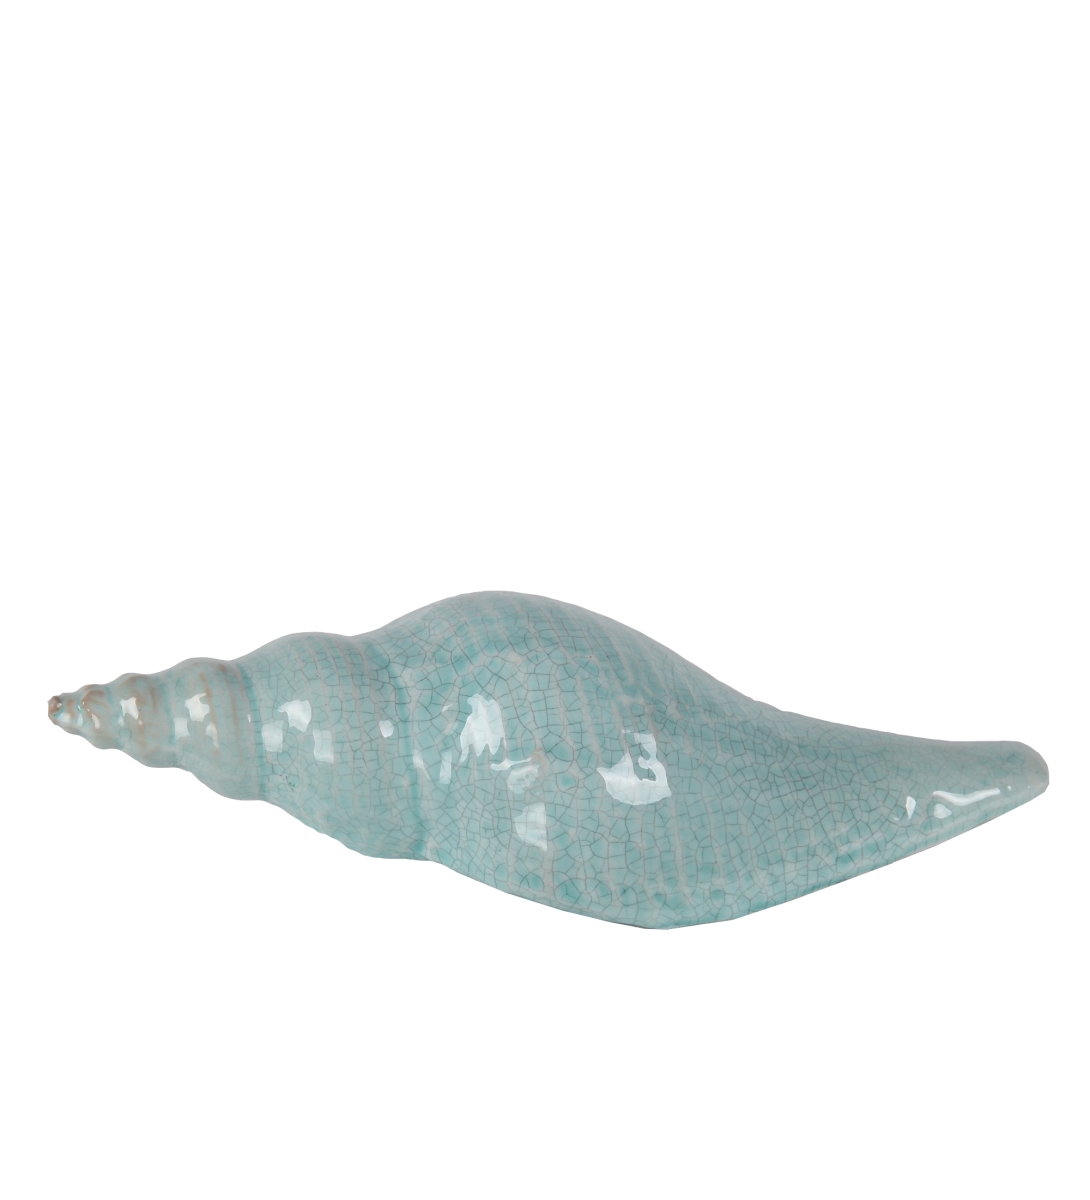 20359 12 X 5 X 4 In. Traditional Ceramic Shell, Blue